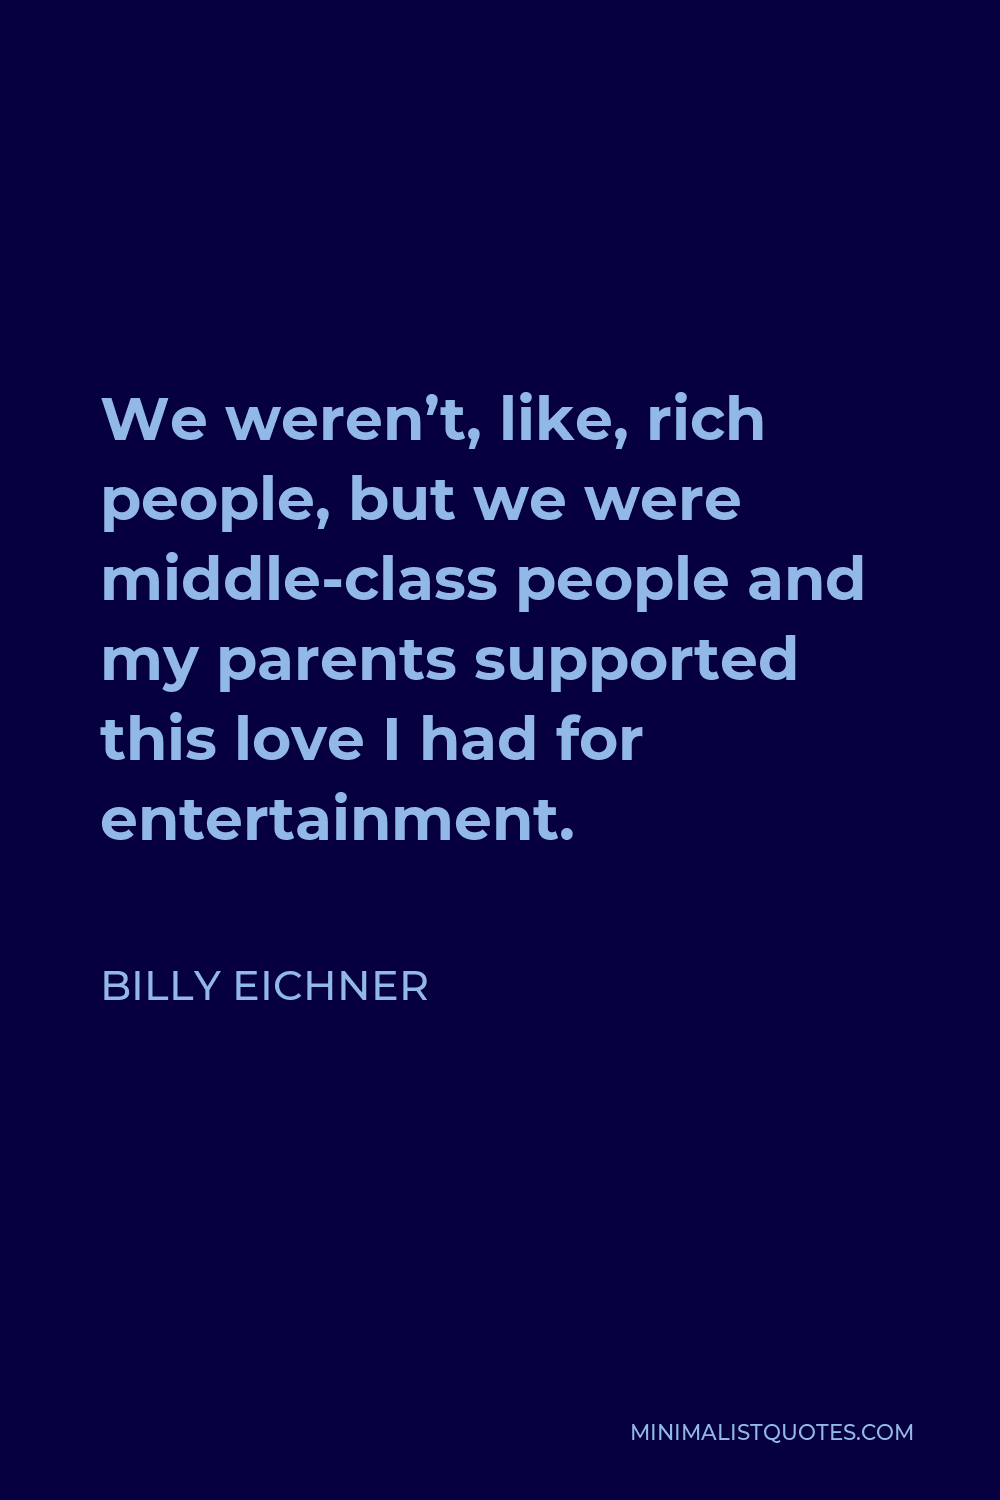 Billy Eichner Quote - We weren’t, like, rich people, but we were middle-class people and my parents supported this love I had for entertainment.